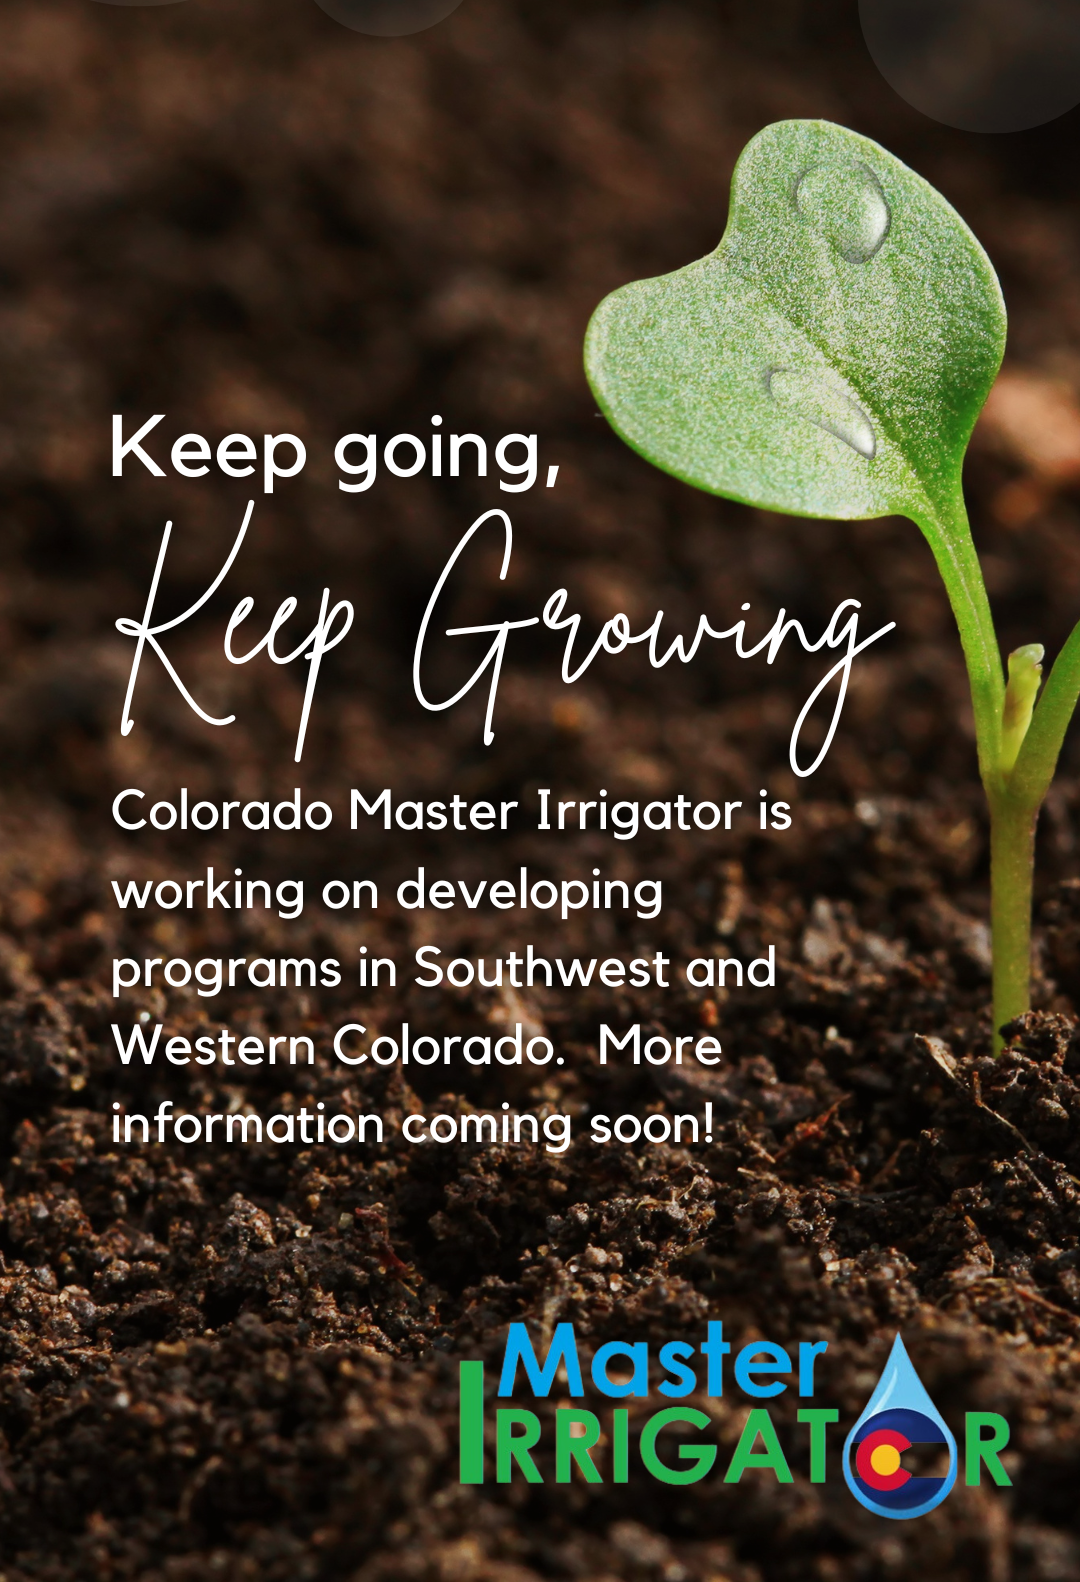 a leaf with soil in background with text saying Keep going, keep growing Colorado Master Irrigator is working on developing programs in Southwest and Western Colorado.  More Information coming soon!